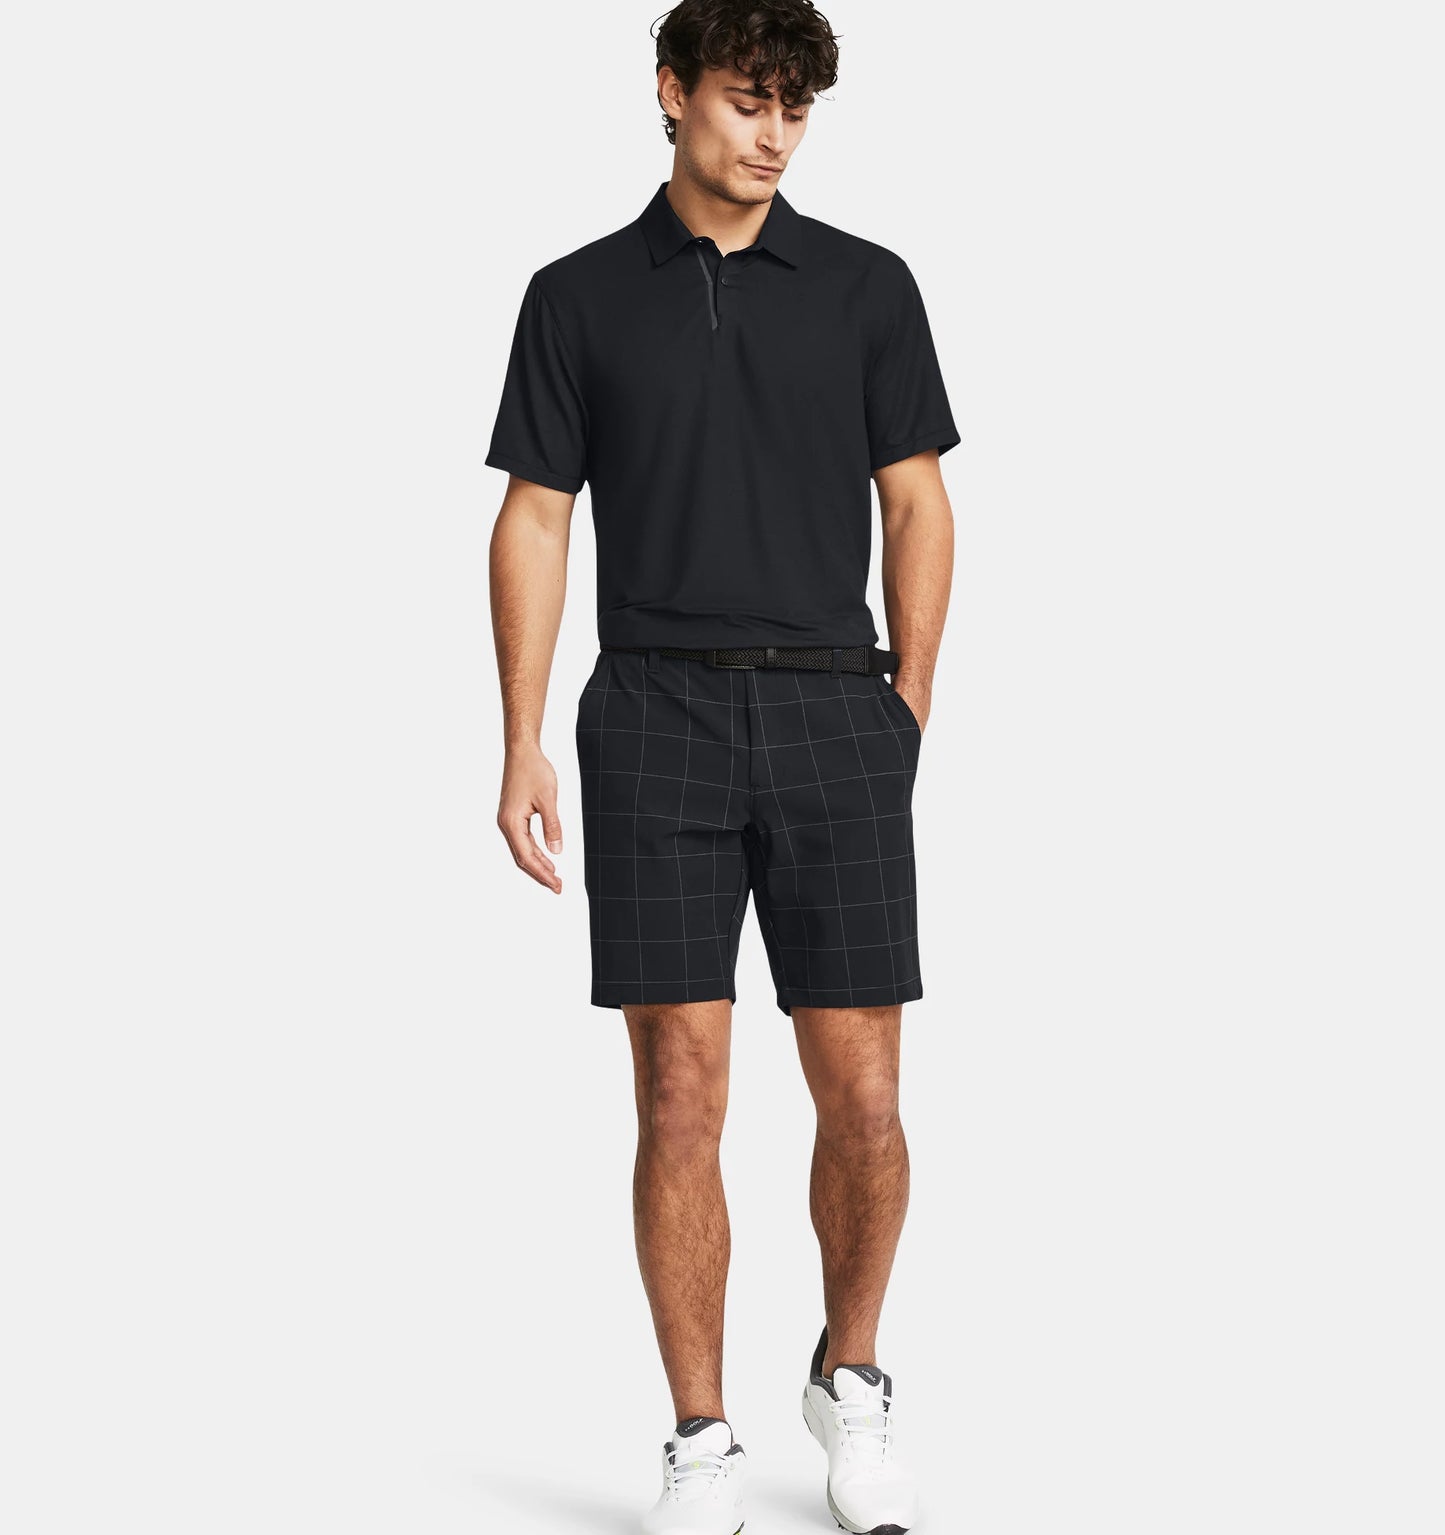 Under Armour Drive Taper Printed Short Black